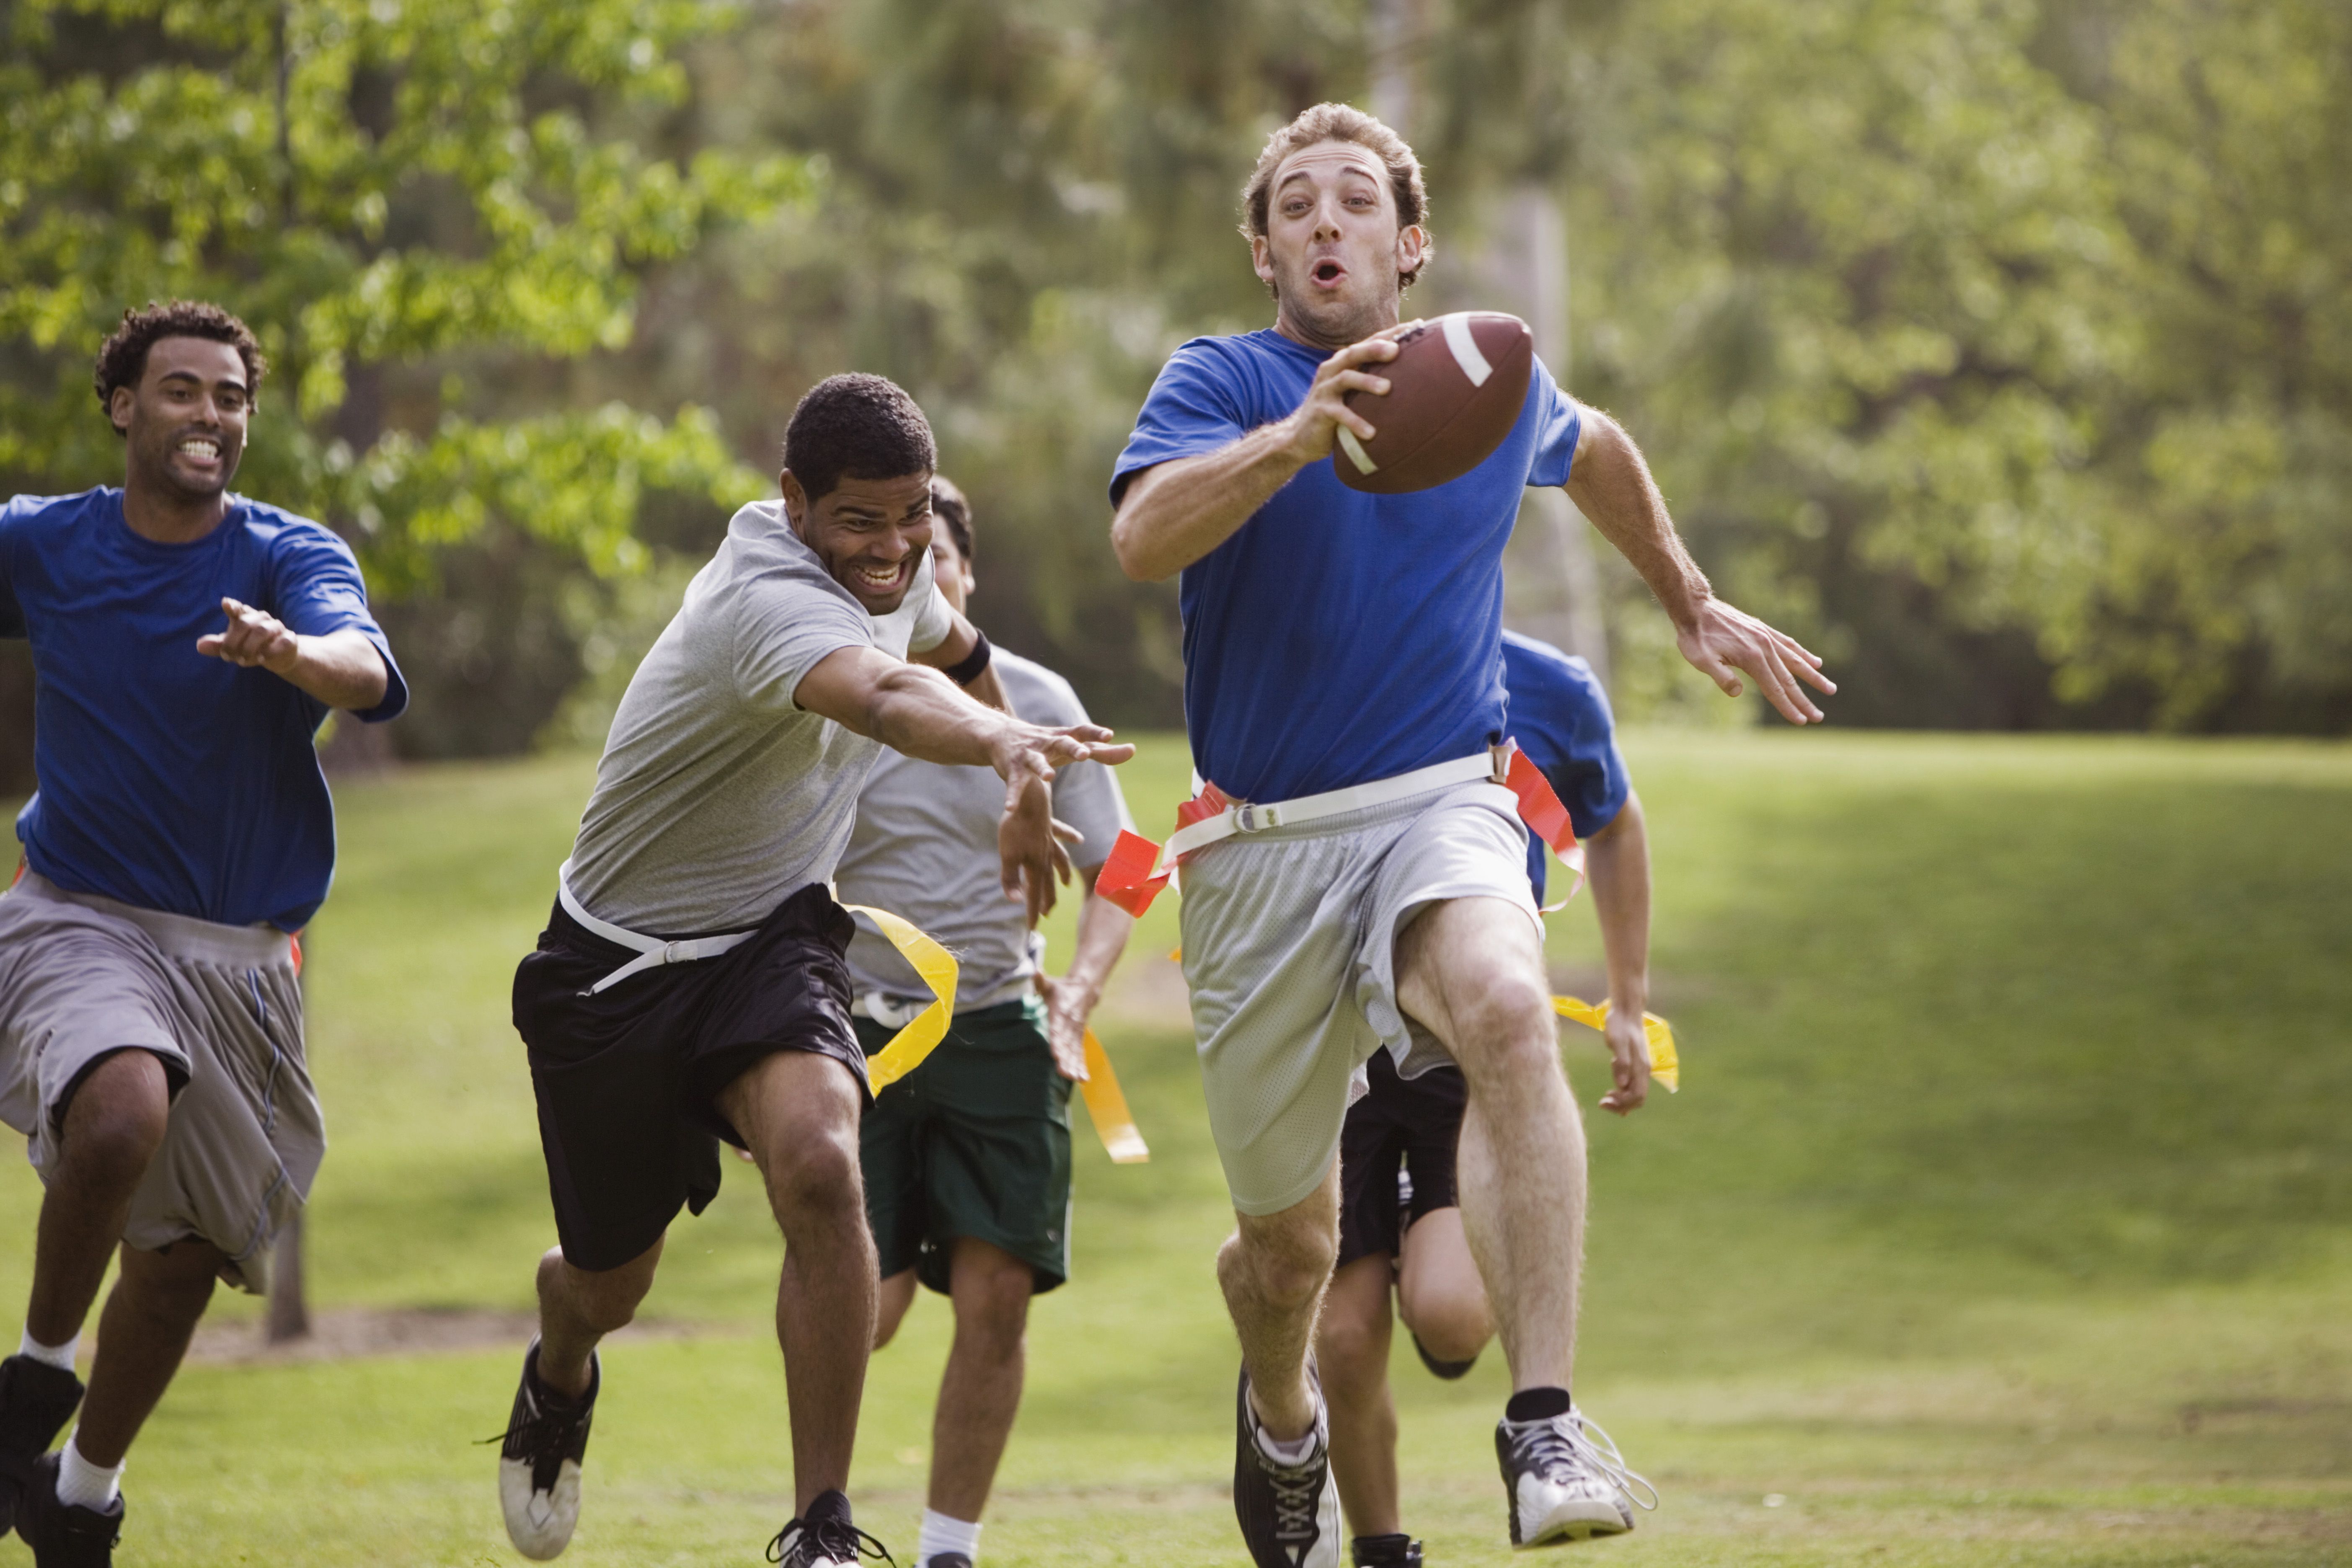 Try This Flag Football Warm Up Series Before Playing the Game